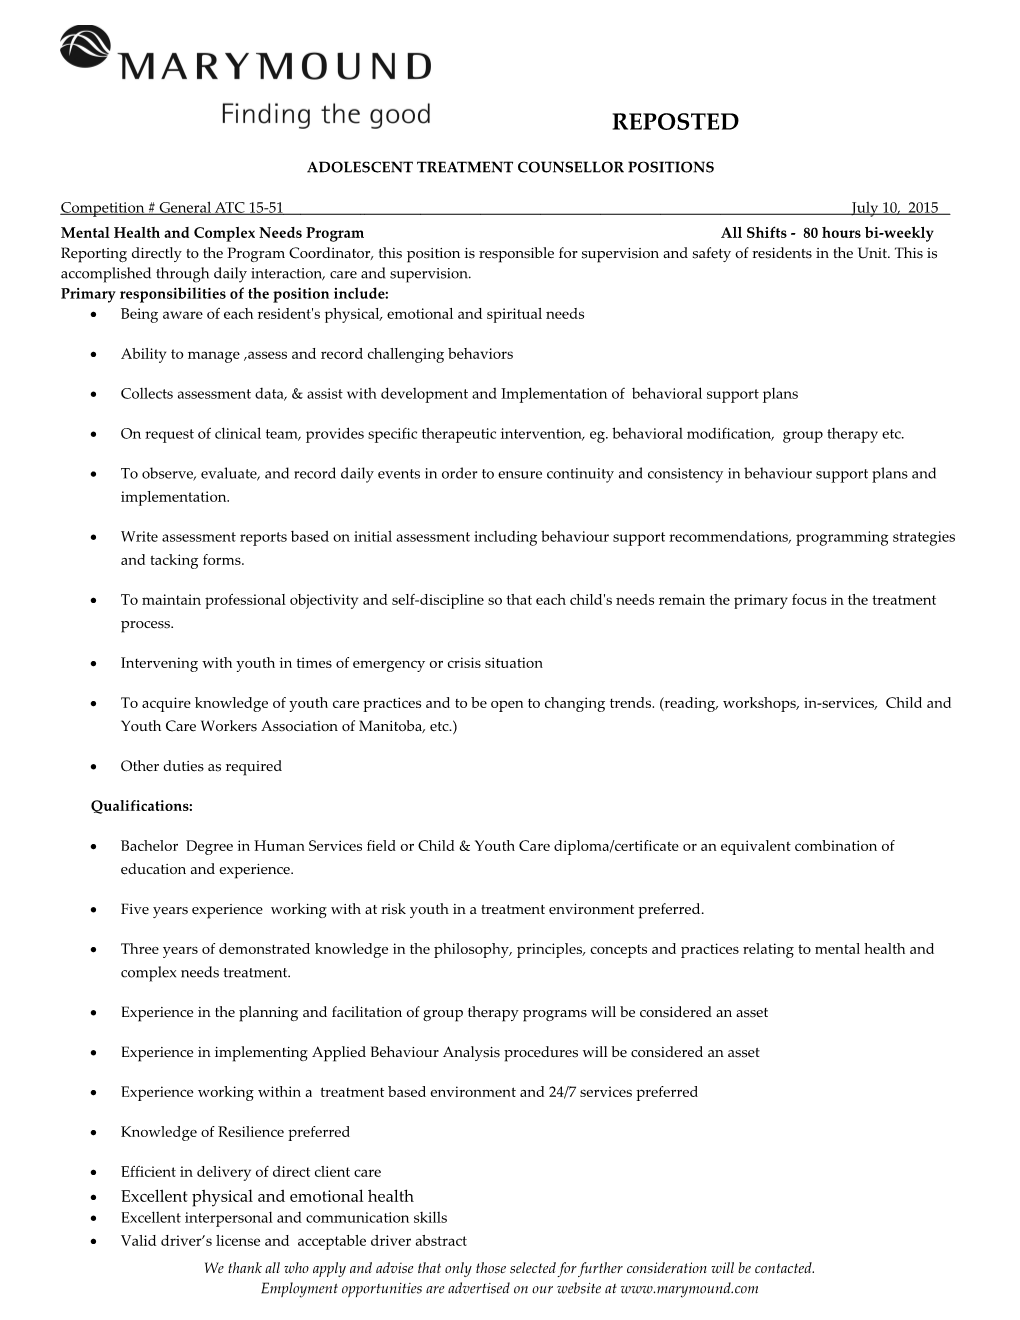 Adolescent Treatment Counsellor Positions